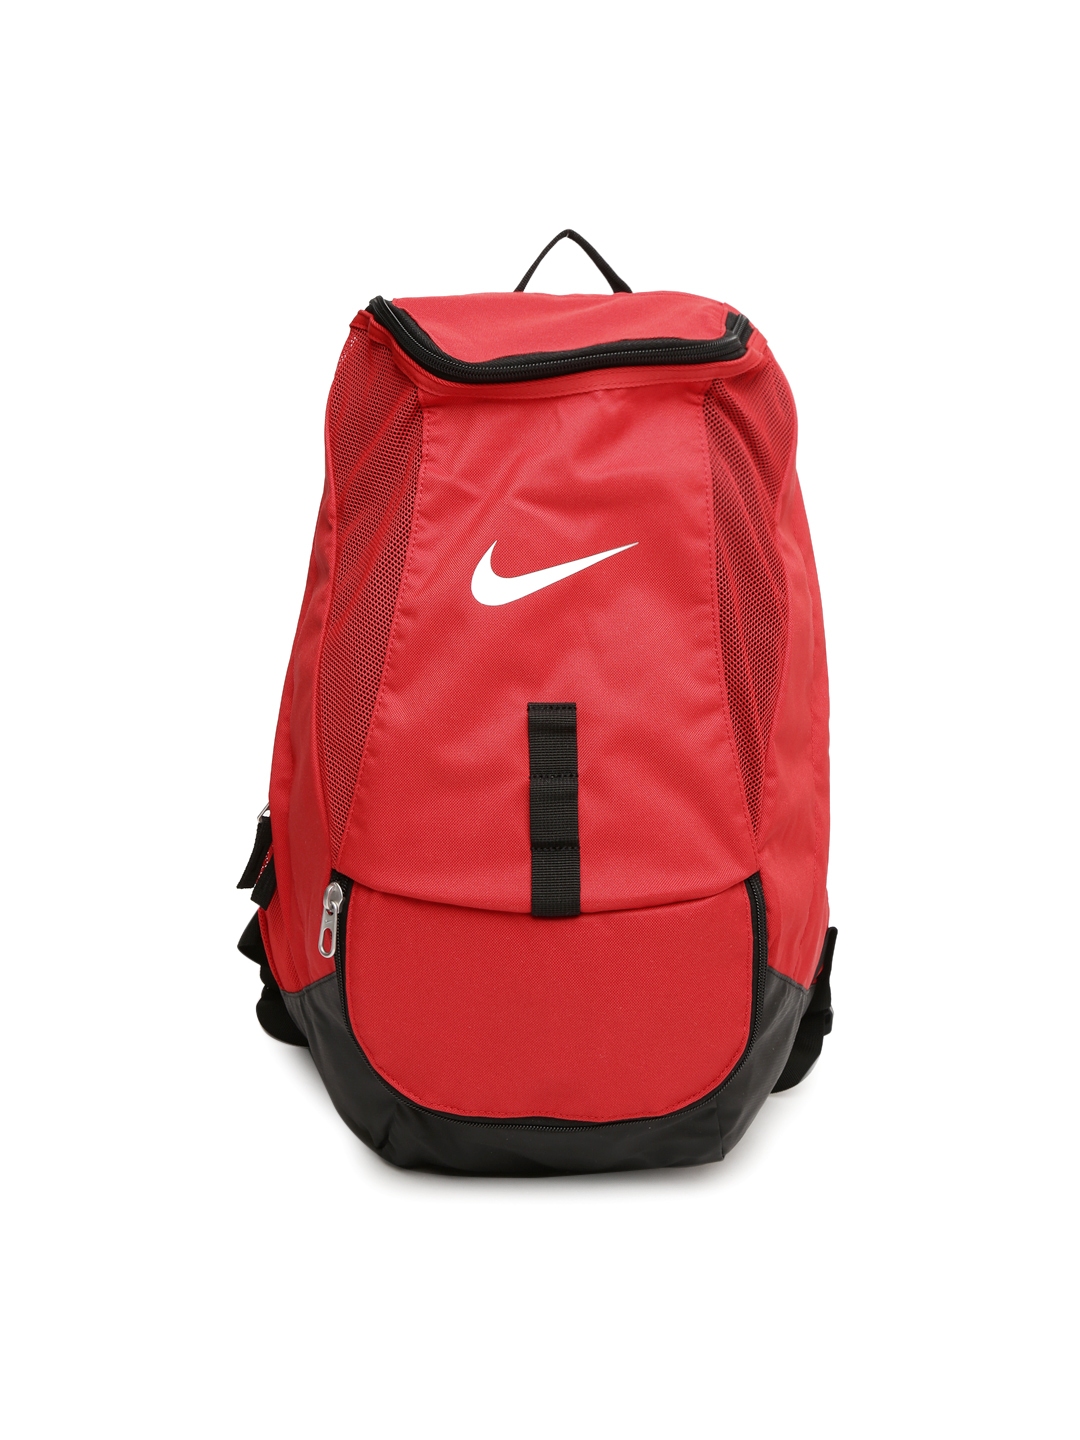 red and black nike bag